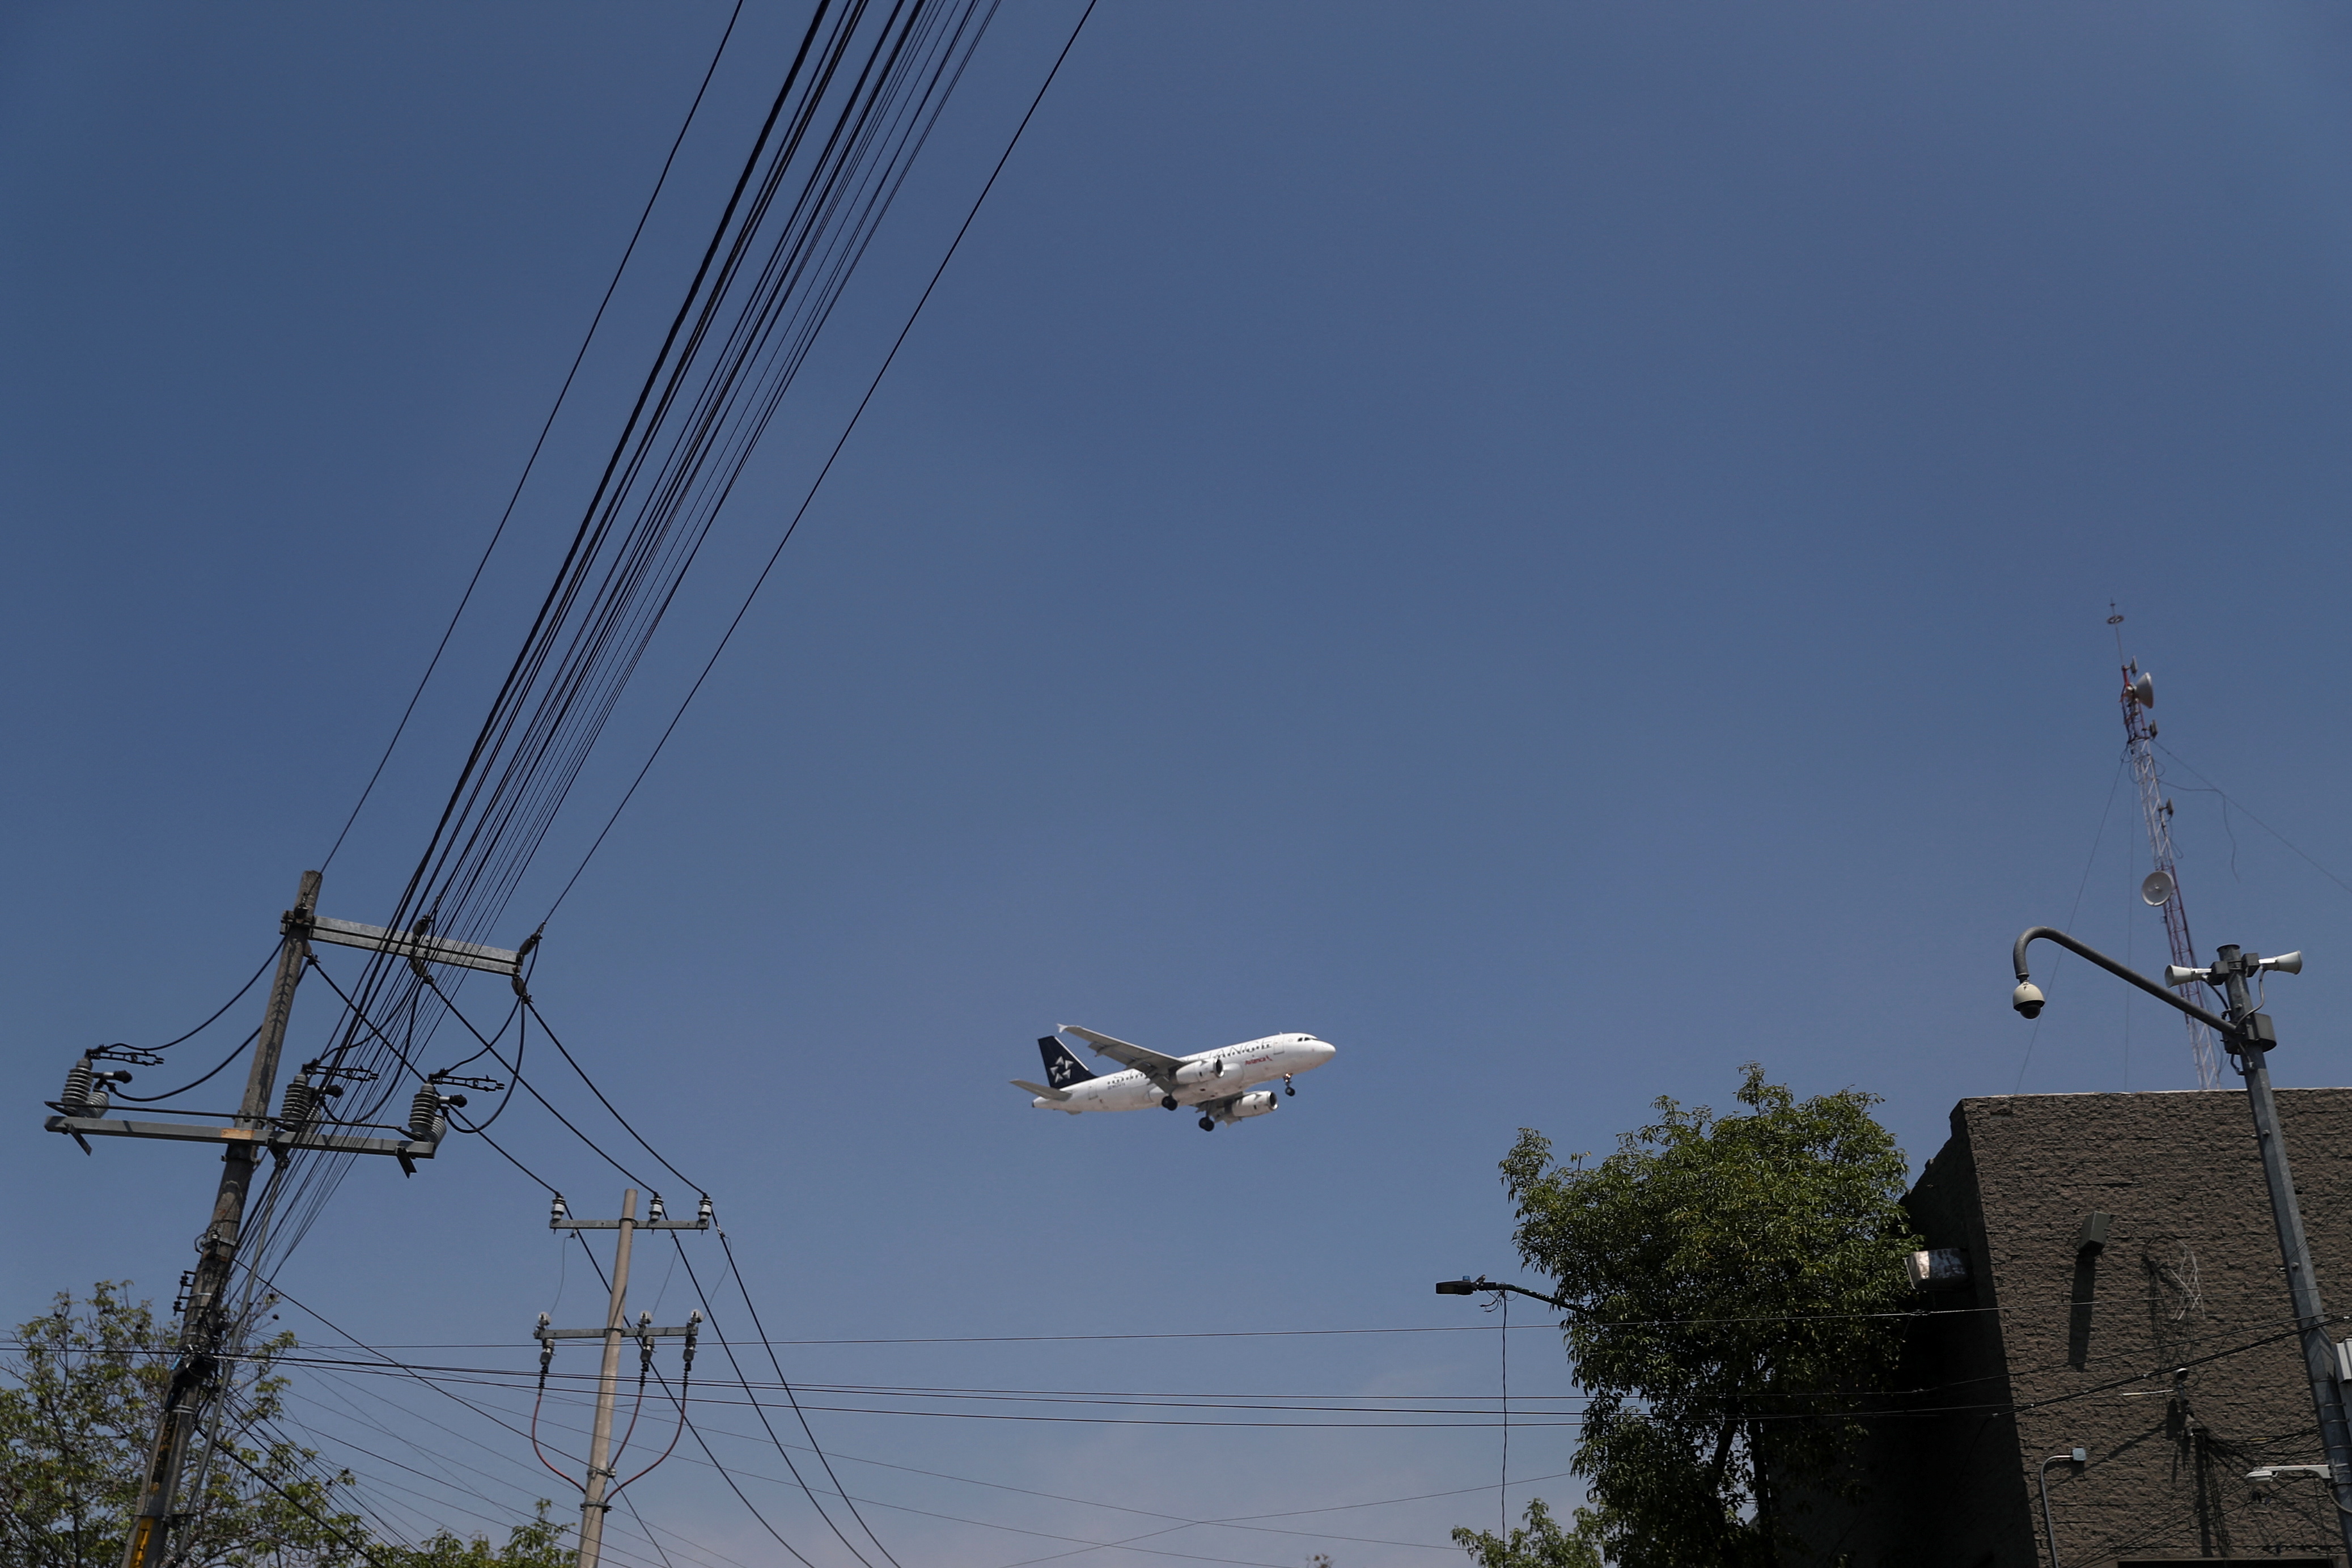 An airplane prepares to land on the airstrip at Benito Juarez international airport in Mexico City